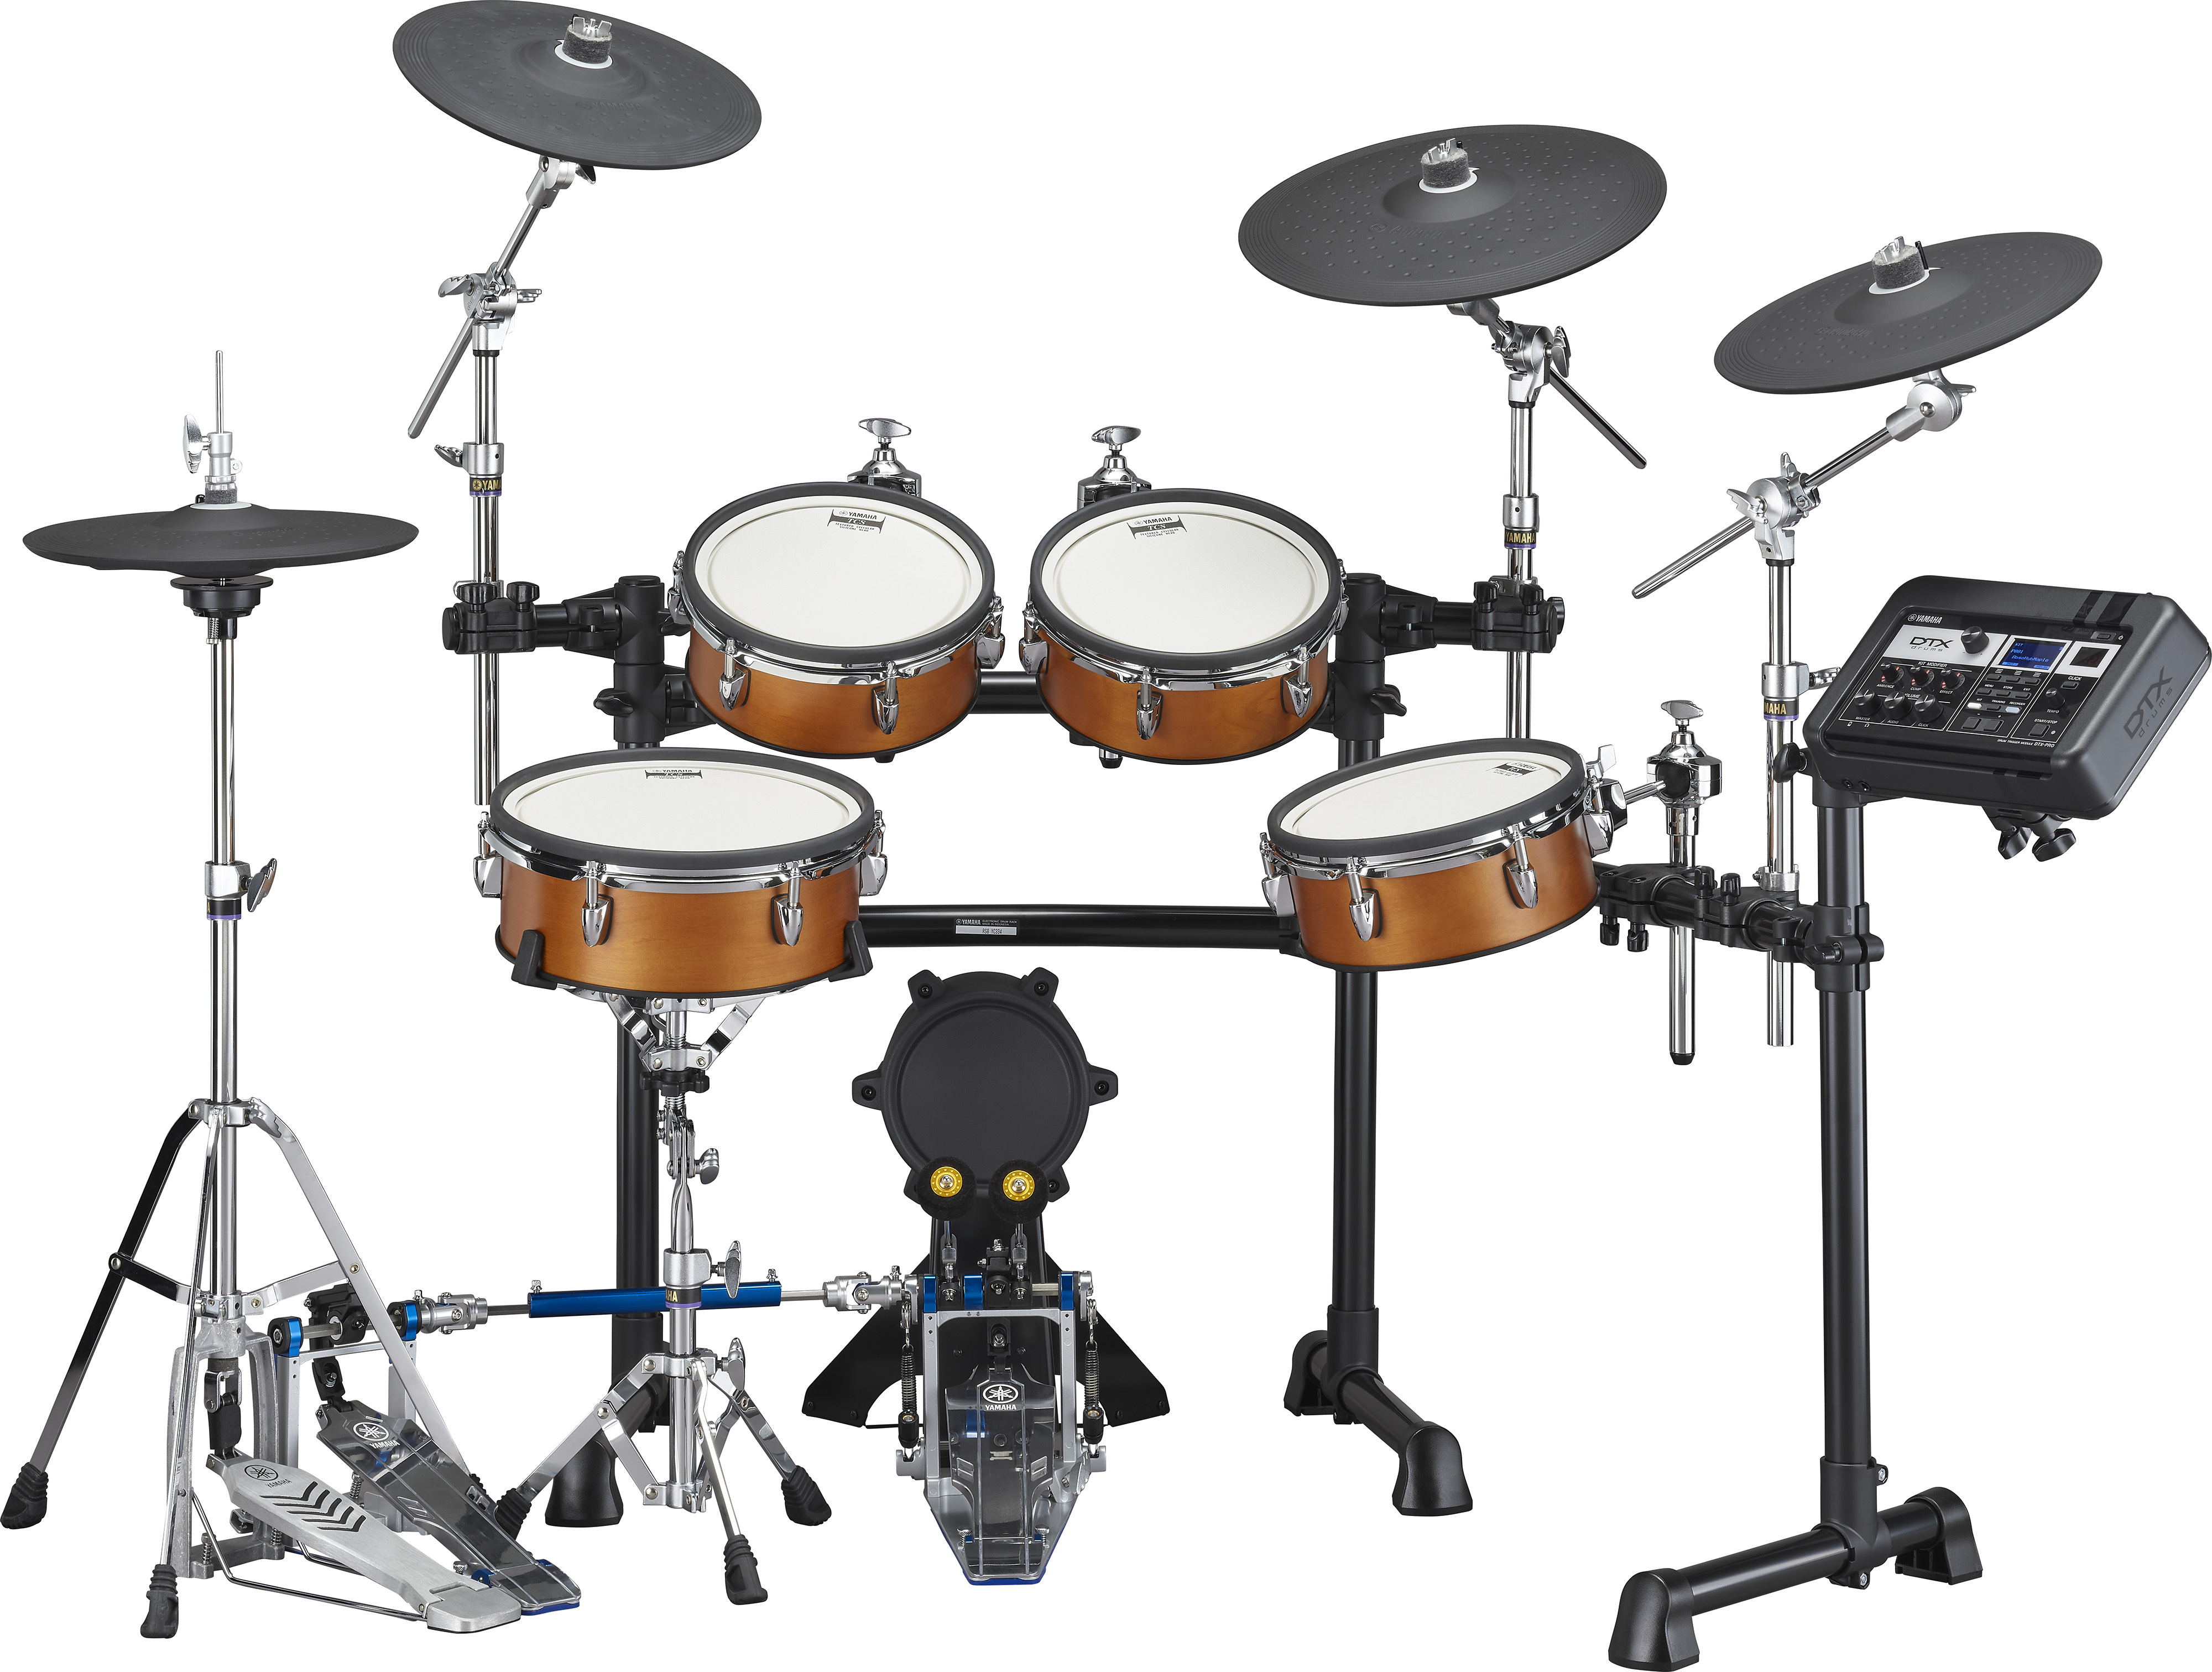 Yamaha Dtx8-kx Electronic Drum Kit Real Wood - Elektronisch drumstel - Main picture